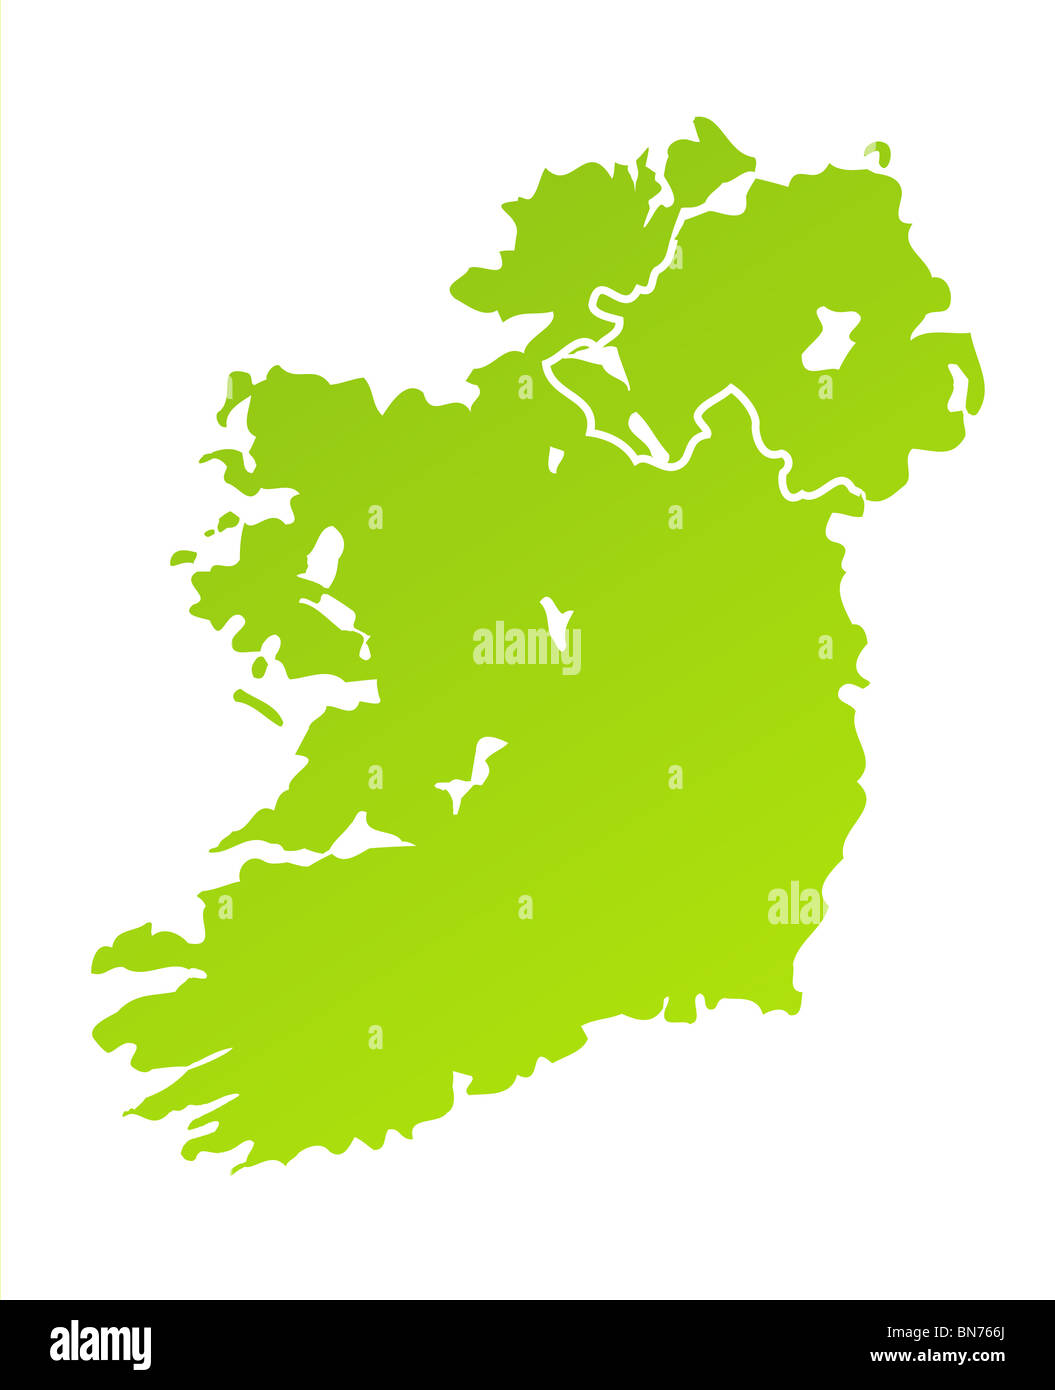 Green gradient map of Northern and Southern Ireland isolated on a white background. Stock Photo